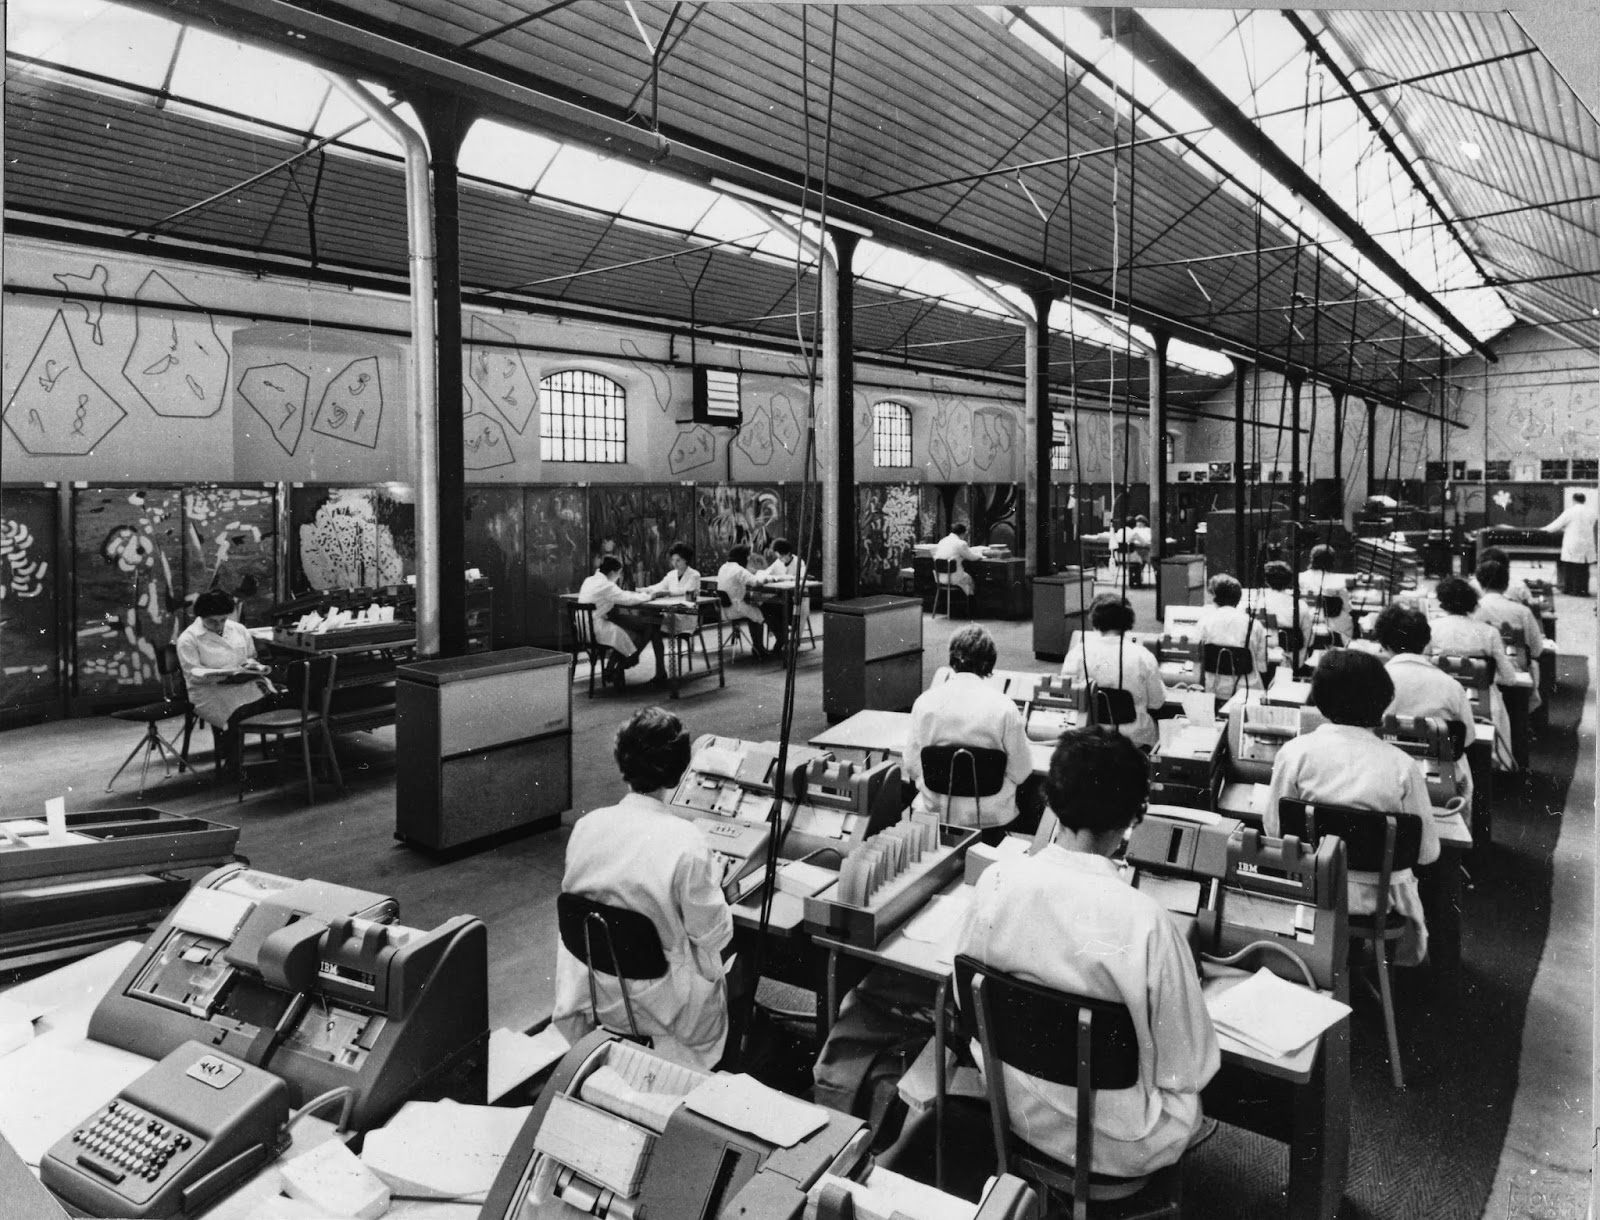 Large industrial space with many desks and women working on punchcards, as part of the large Index Thomisticus project in the 1950s.